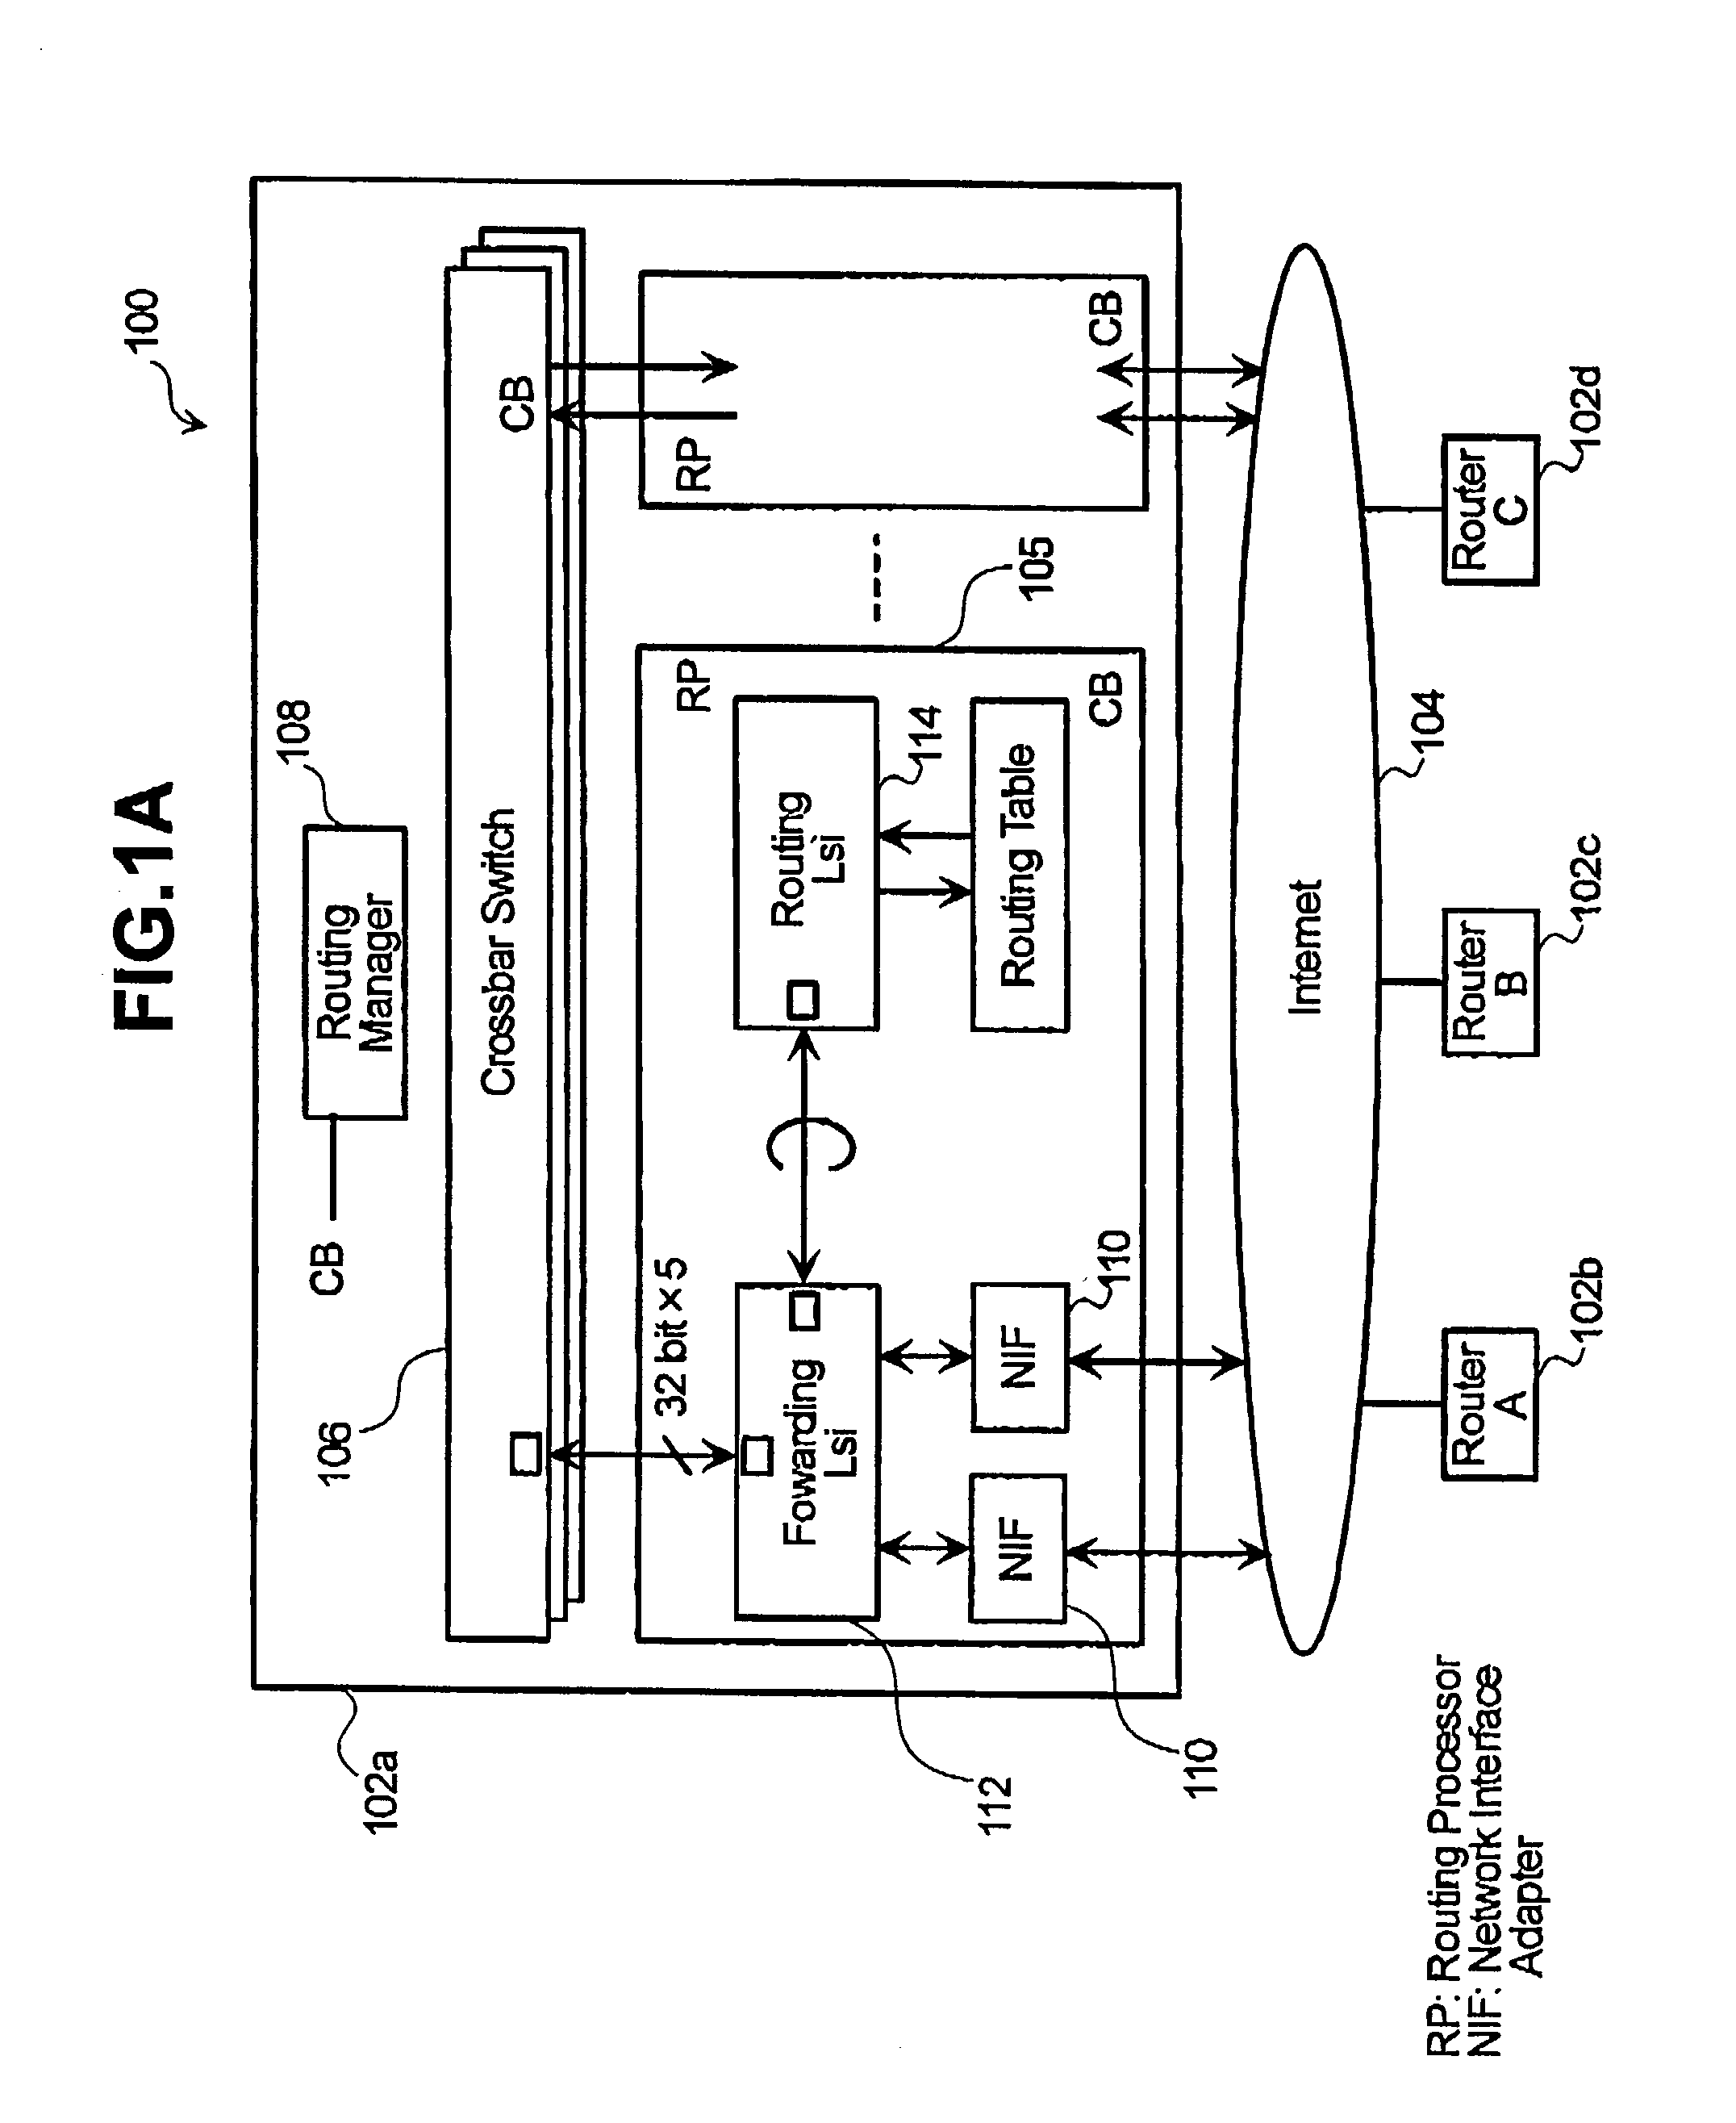 Method and system of bidirectional data transmission and reception